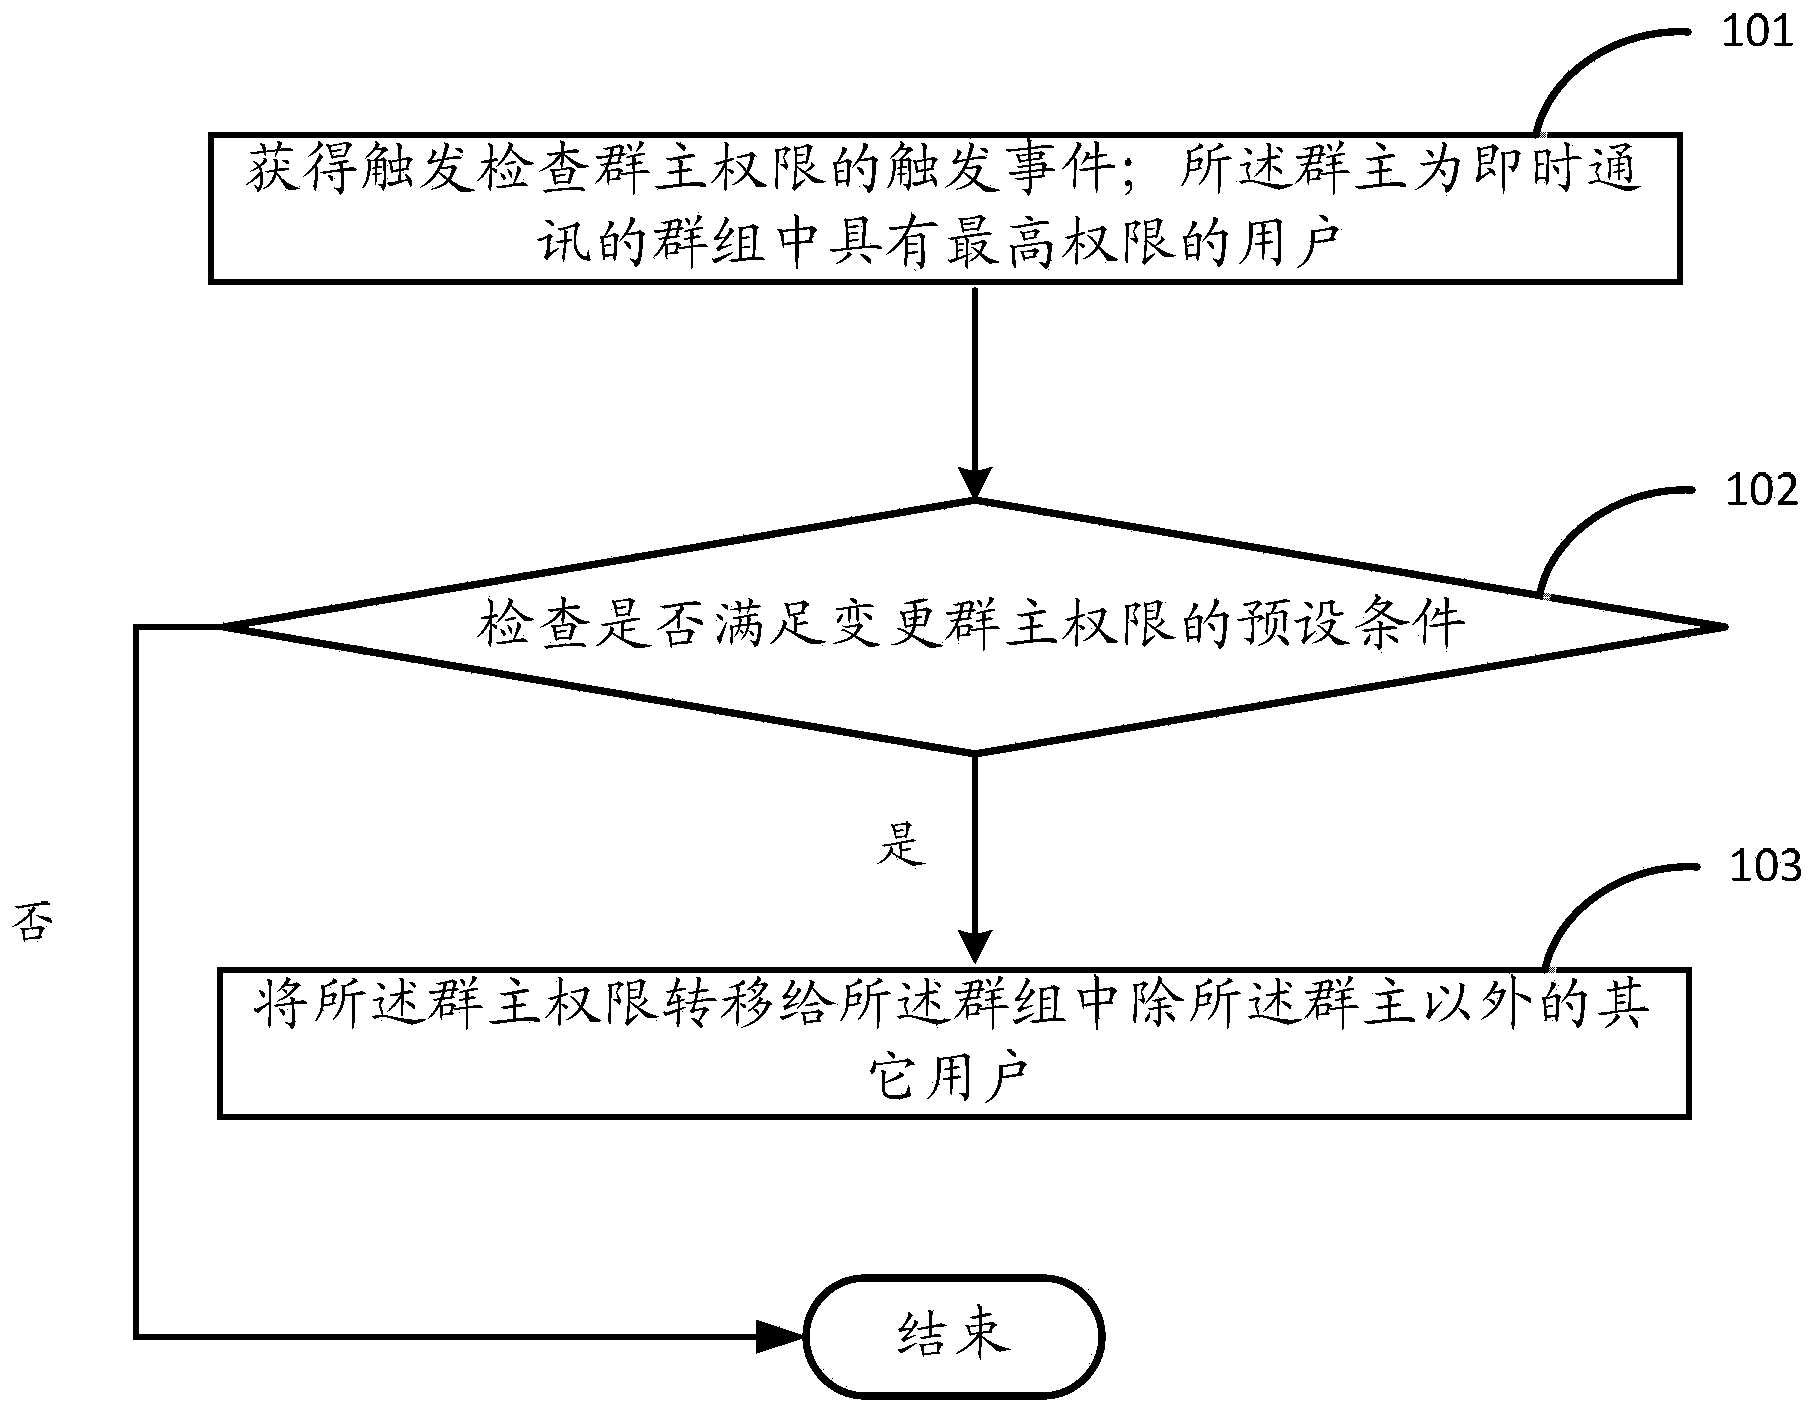 Method and device for controlling user permission